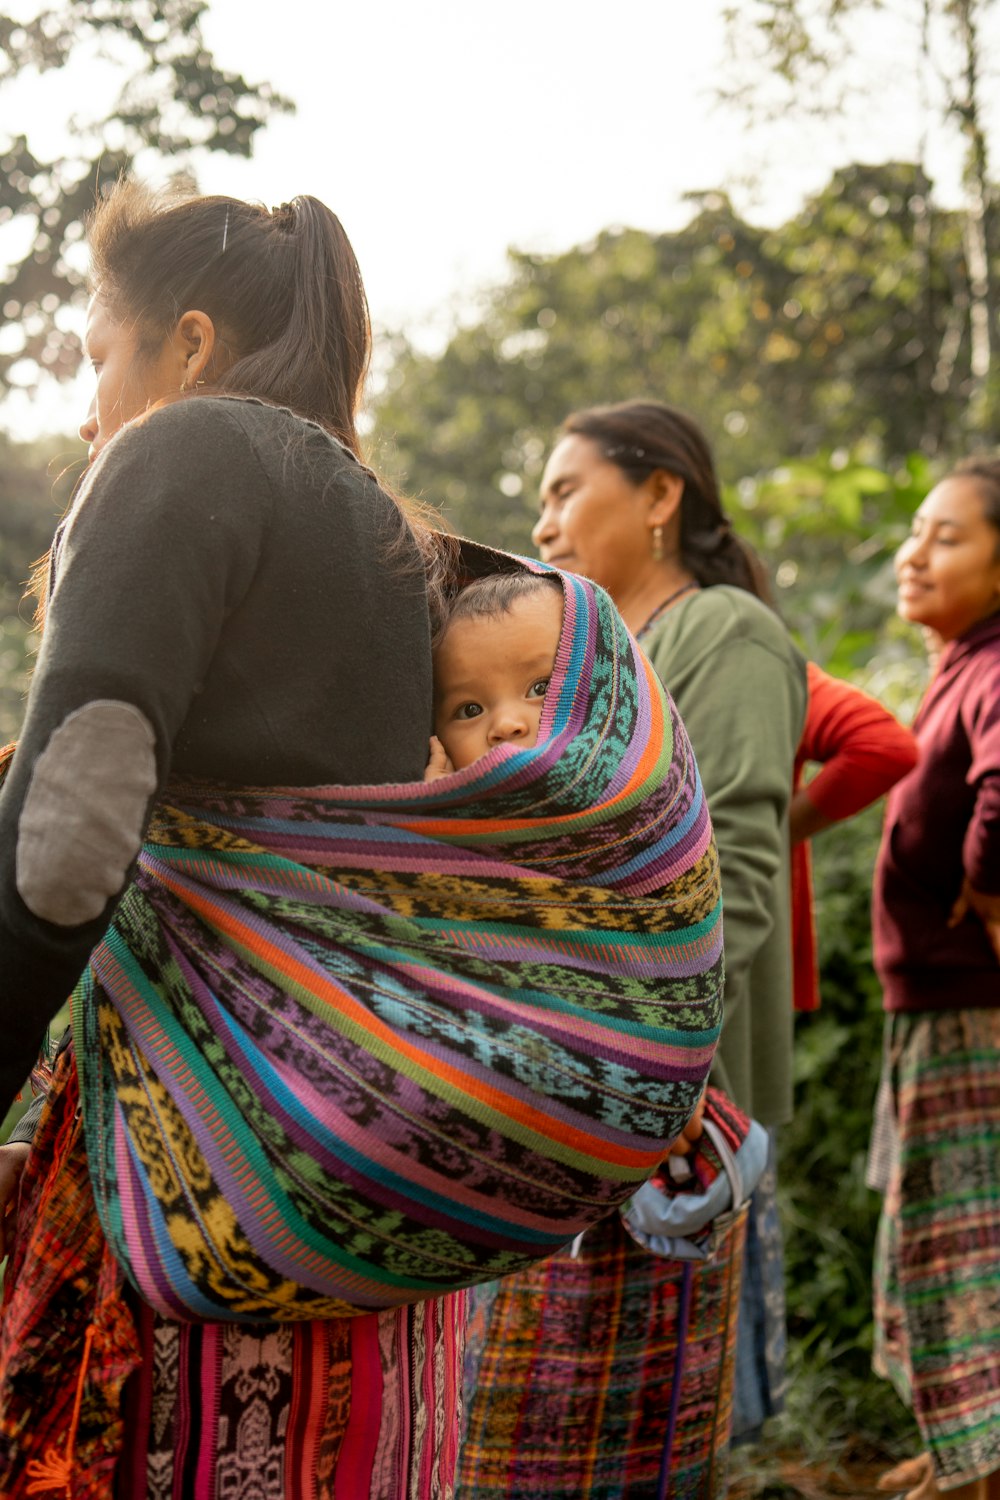 a woman carrying a child in a colorful wrap